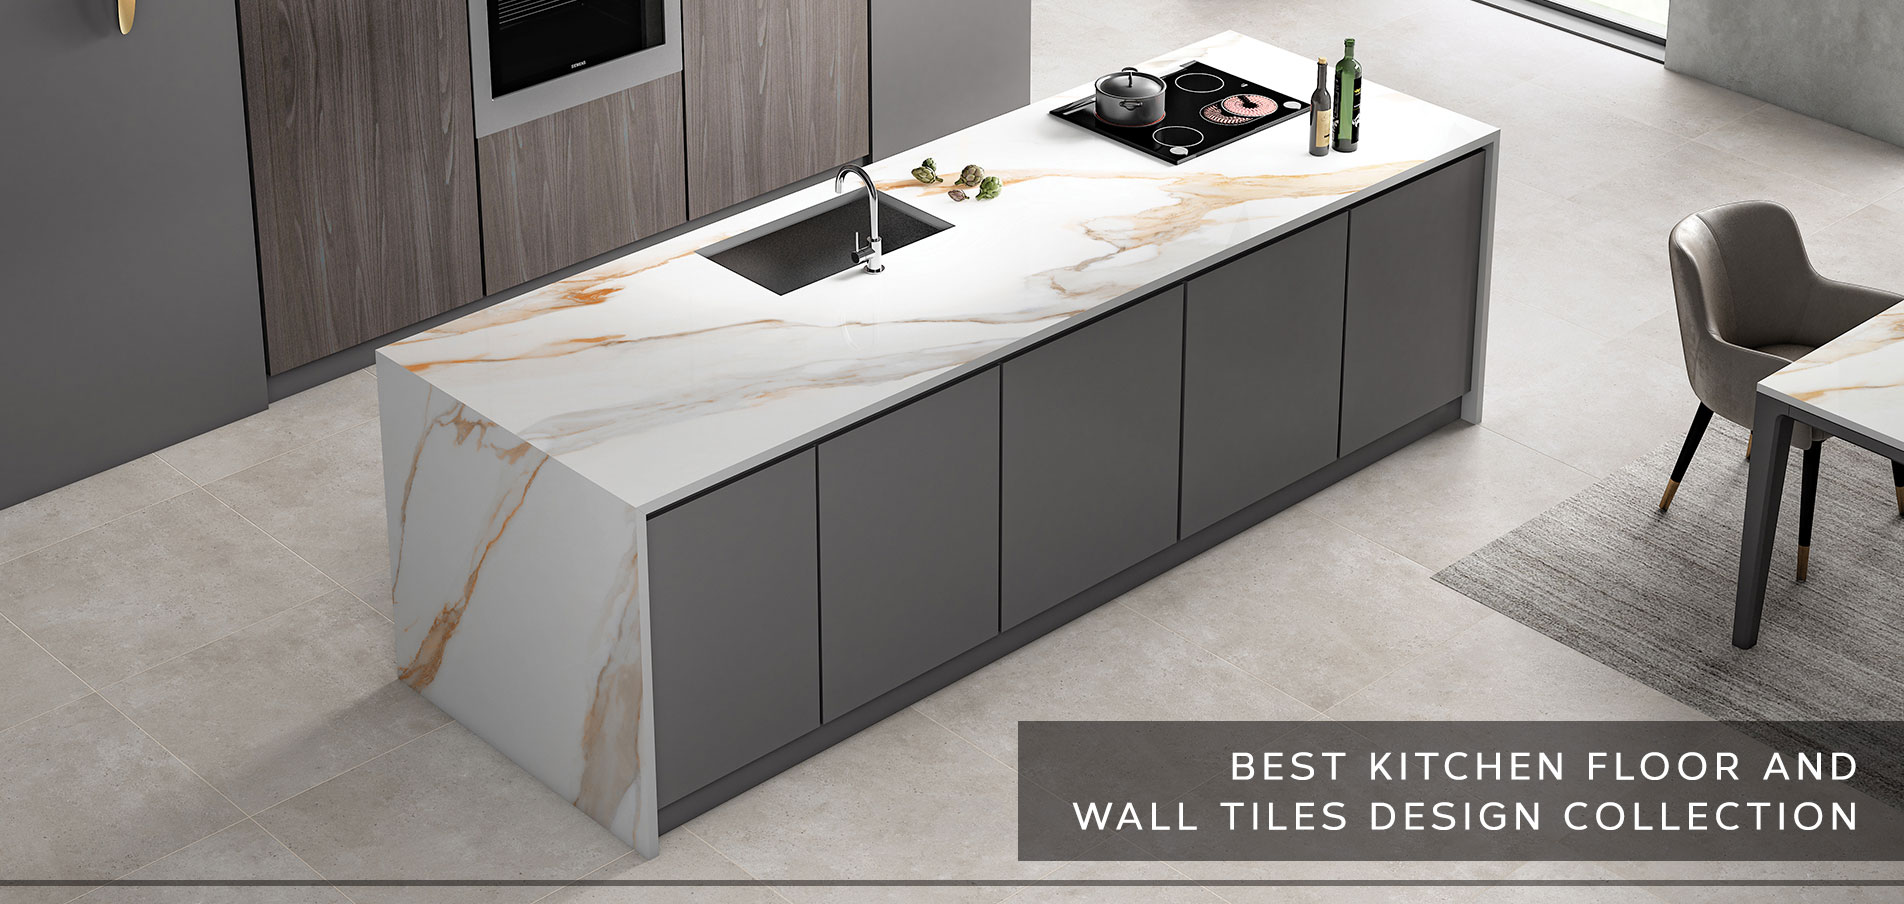 Explore the Best Kitchen Floor and Wall Tiles Collection